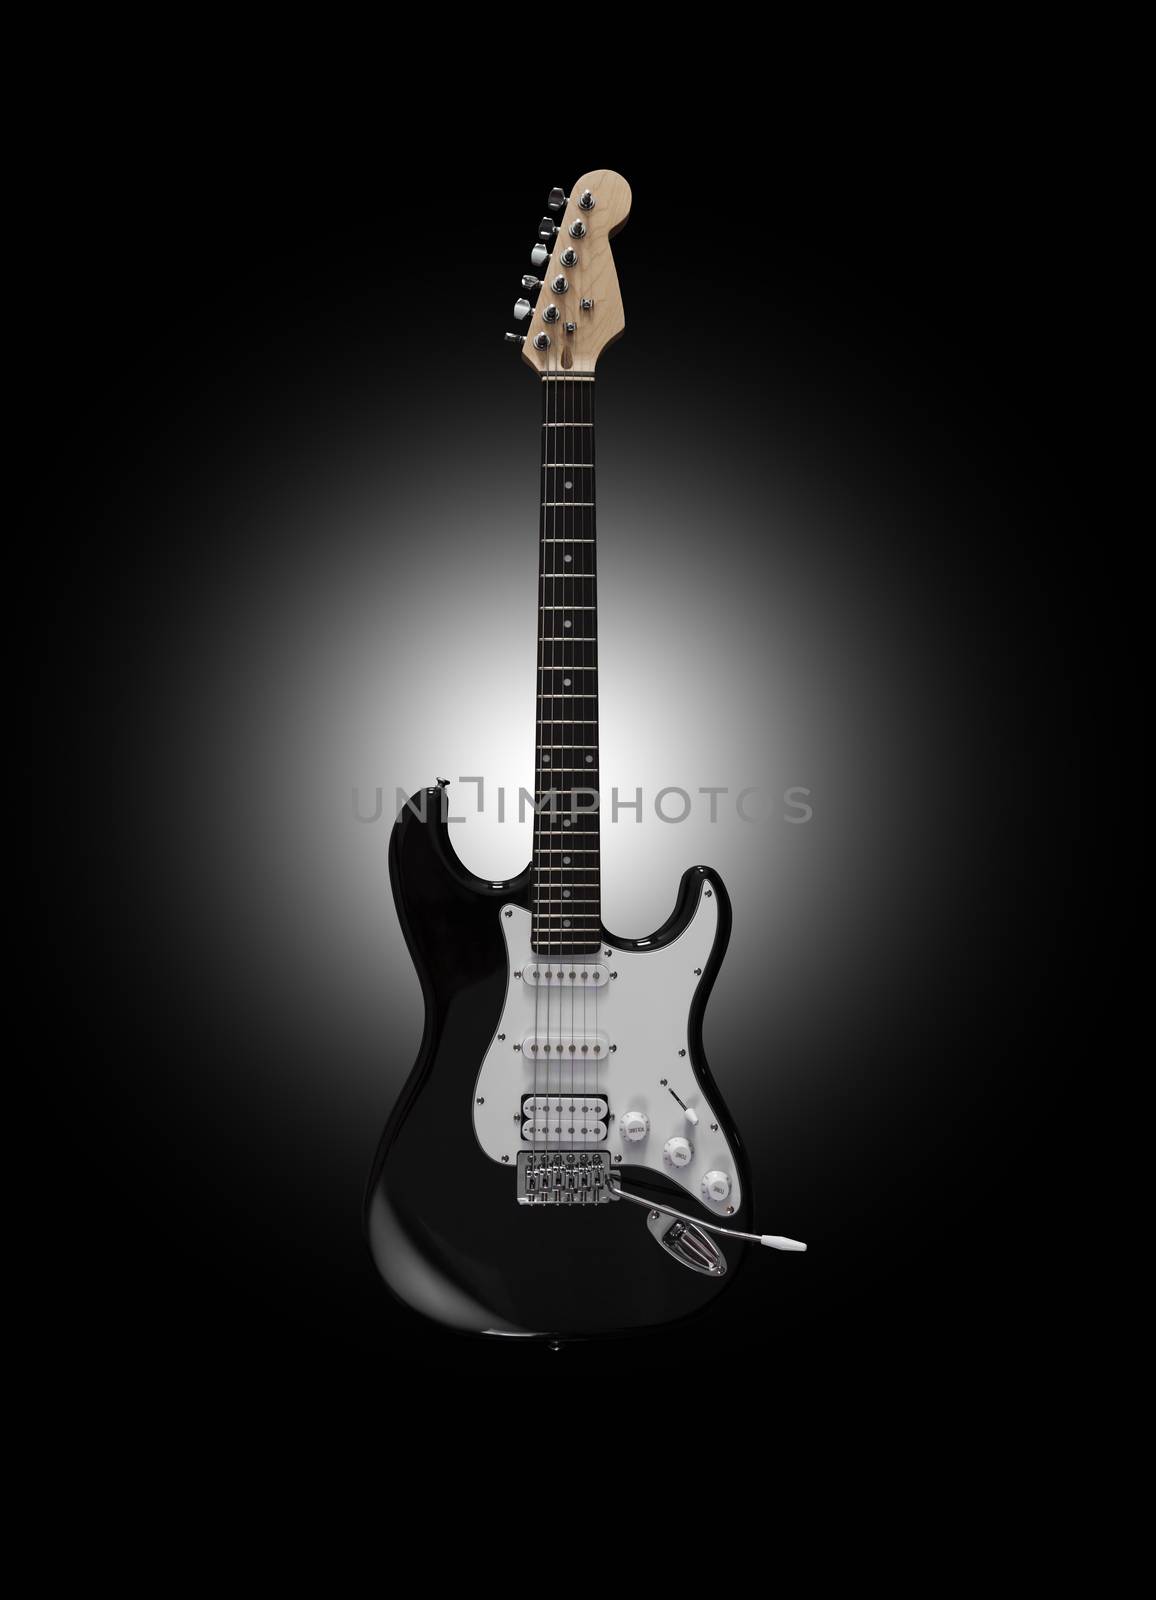 CHISINAU, MOLDOVA - April 22, 2017: Black electric guitar on black background. With clipping path